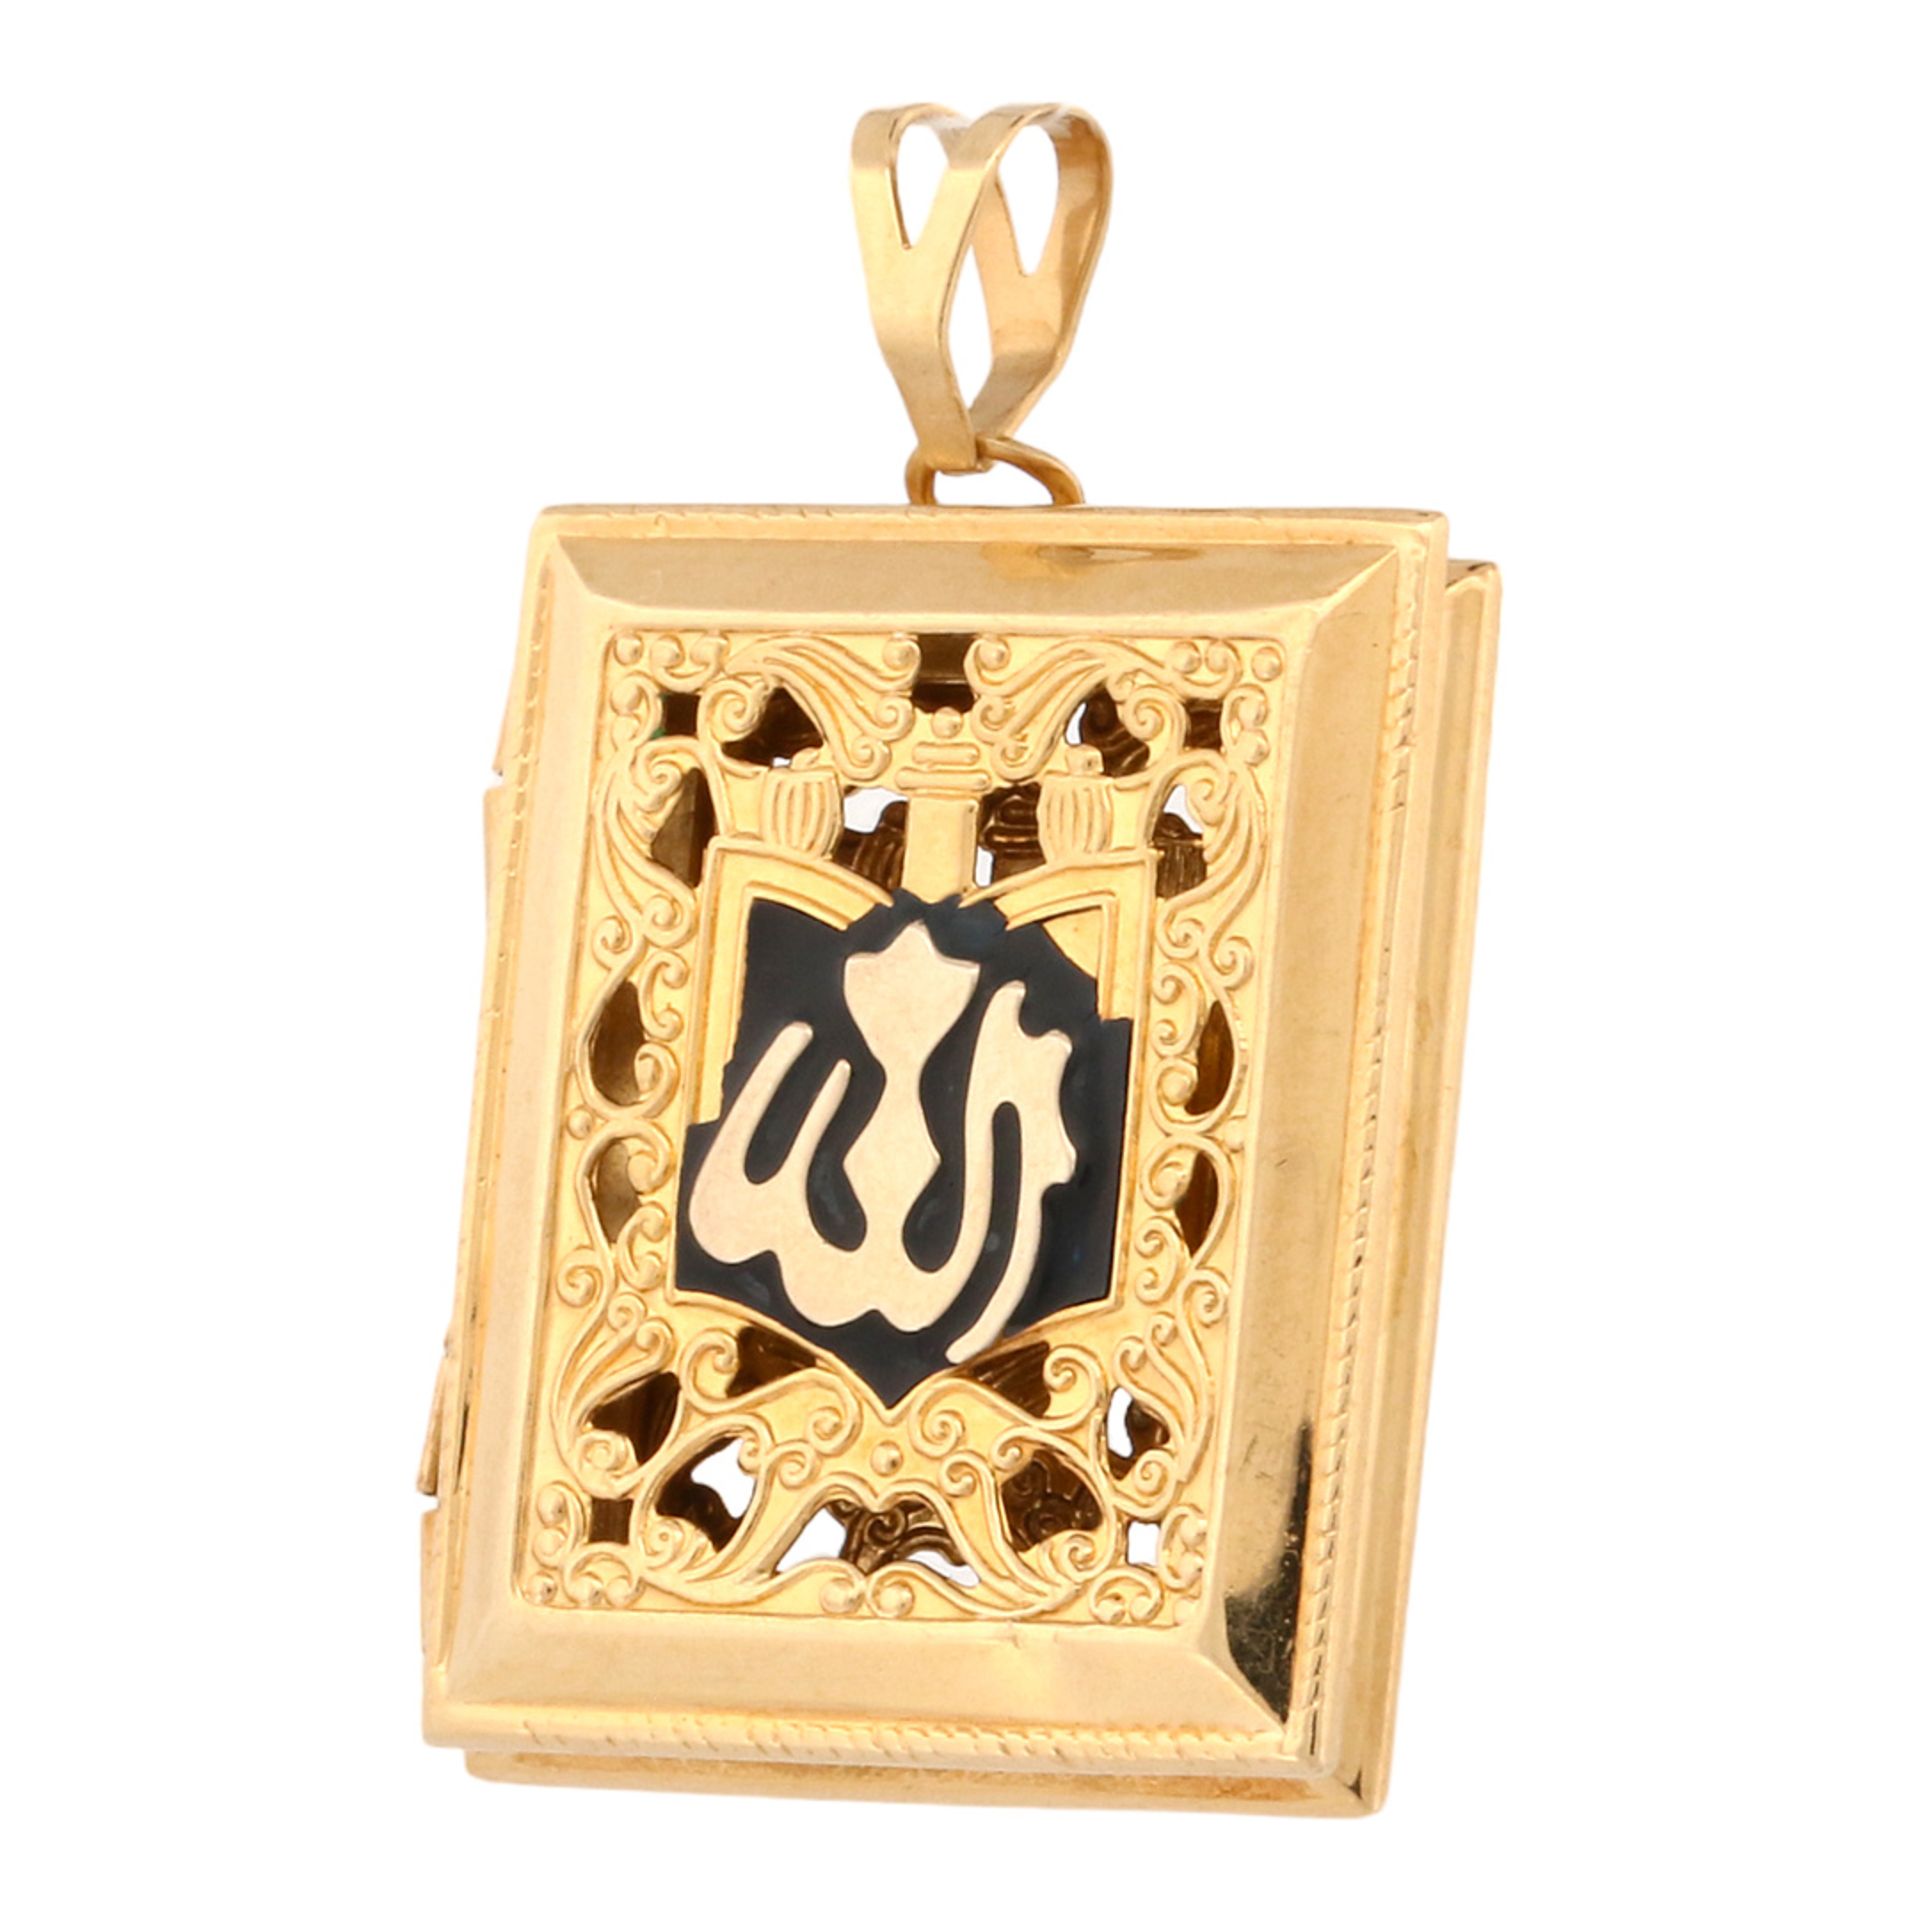 Openable pendant of a Koran with "Allah" inscription